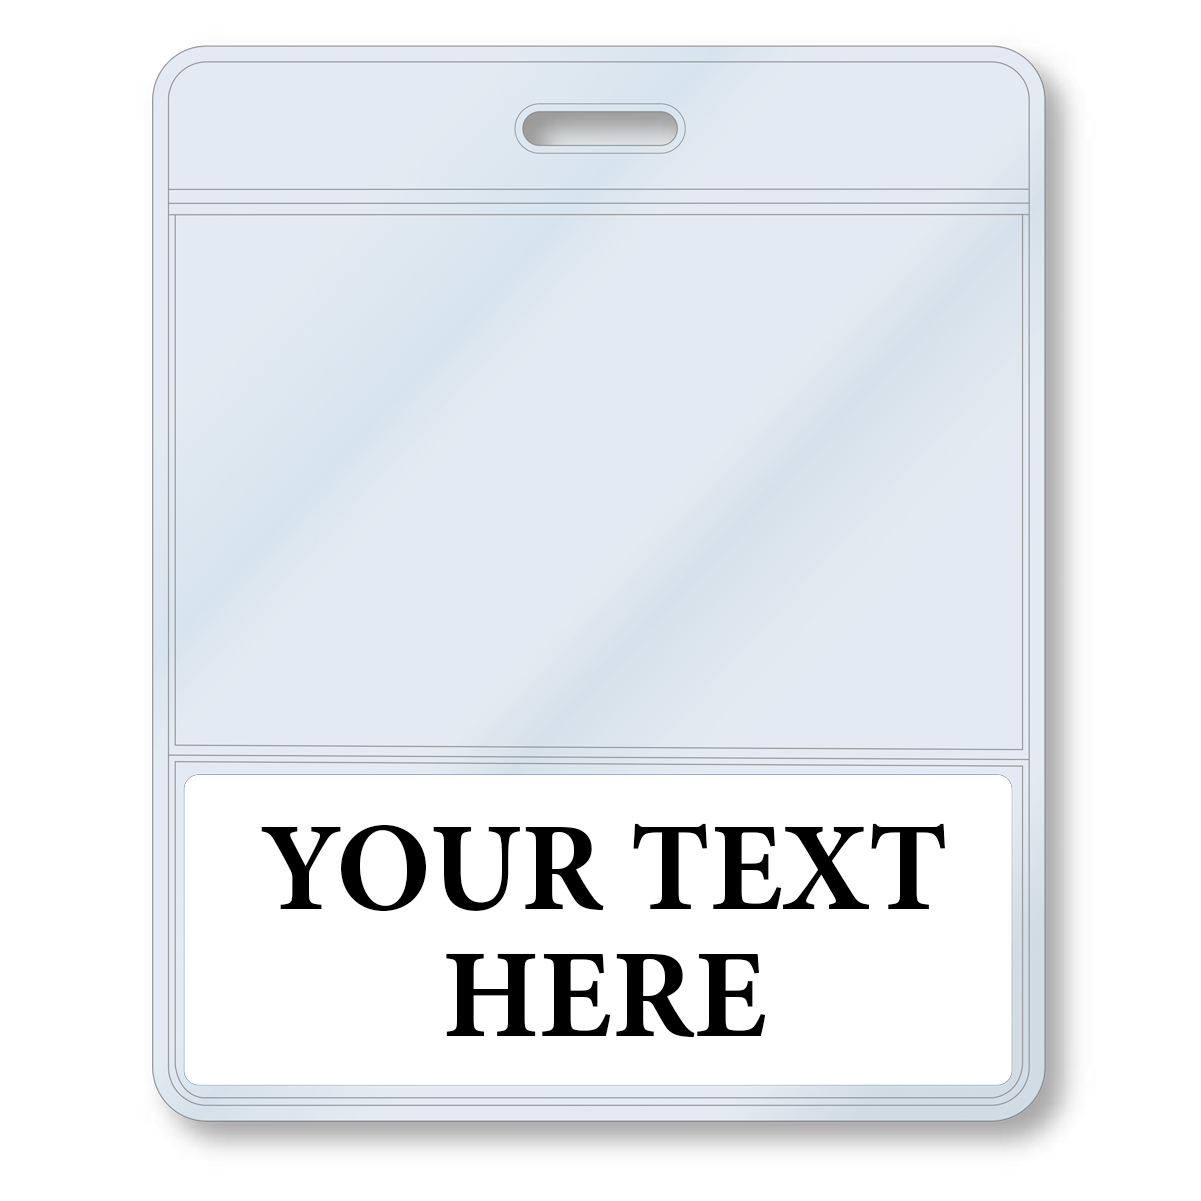 A Custom Printed BadgeBottoms® Horizontal (Badge Holder & Badge Buddy IN ONE) with a slot for an insert at the top and the words “YOUR TEXT HERE” printed in bold at the bottom, allowing for a fully customizable title.